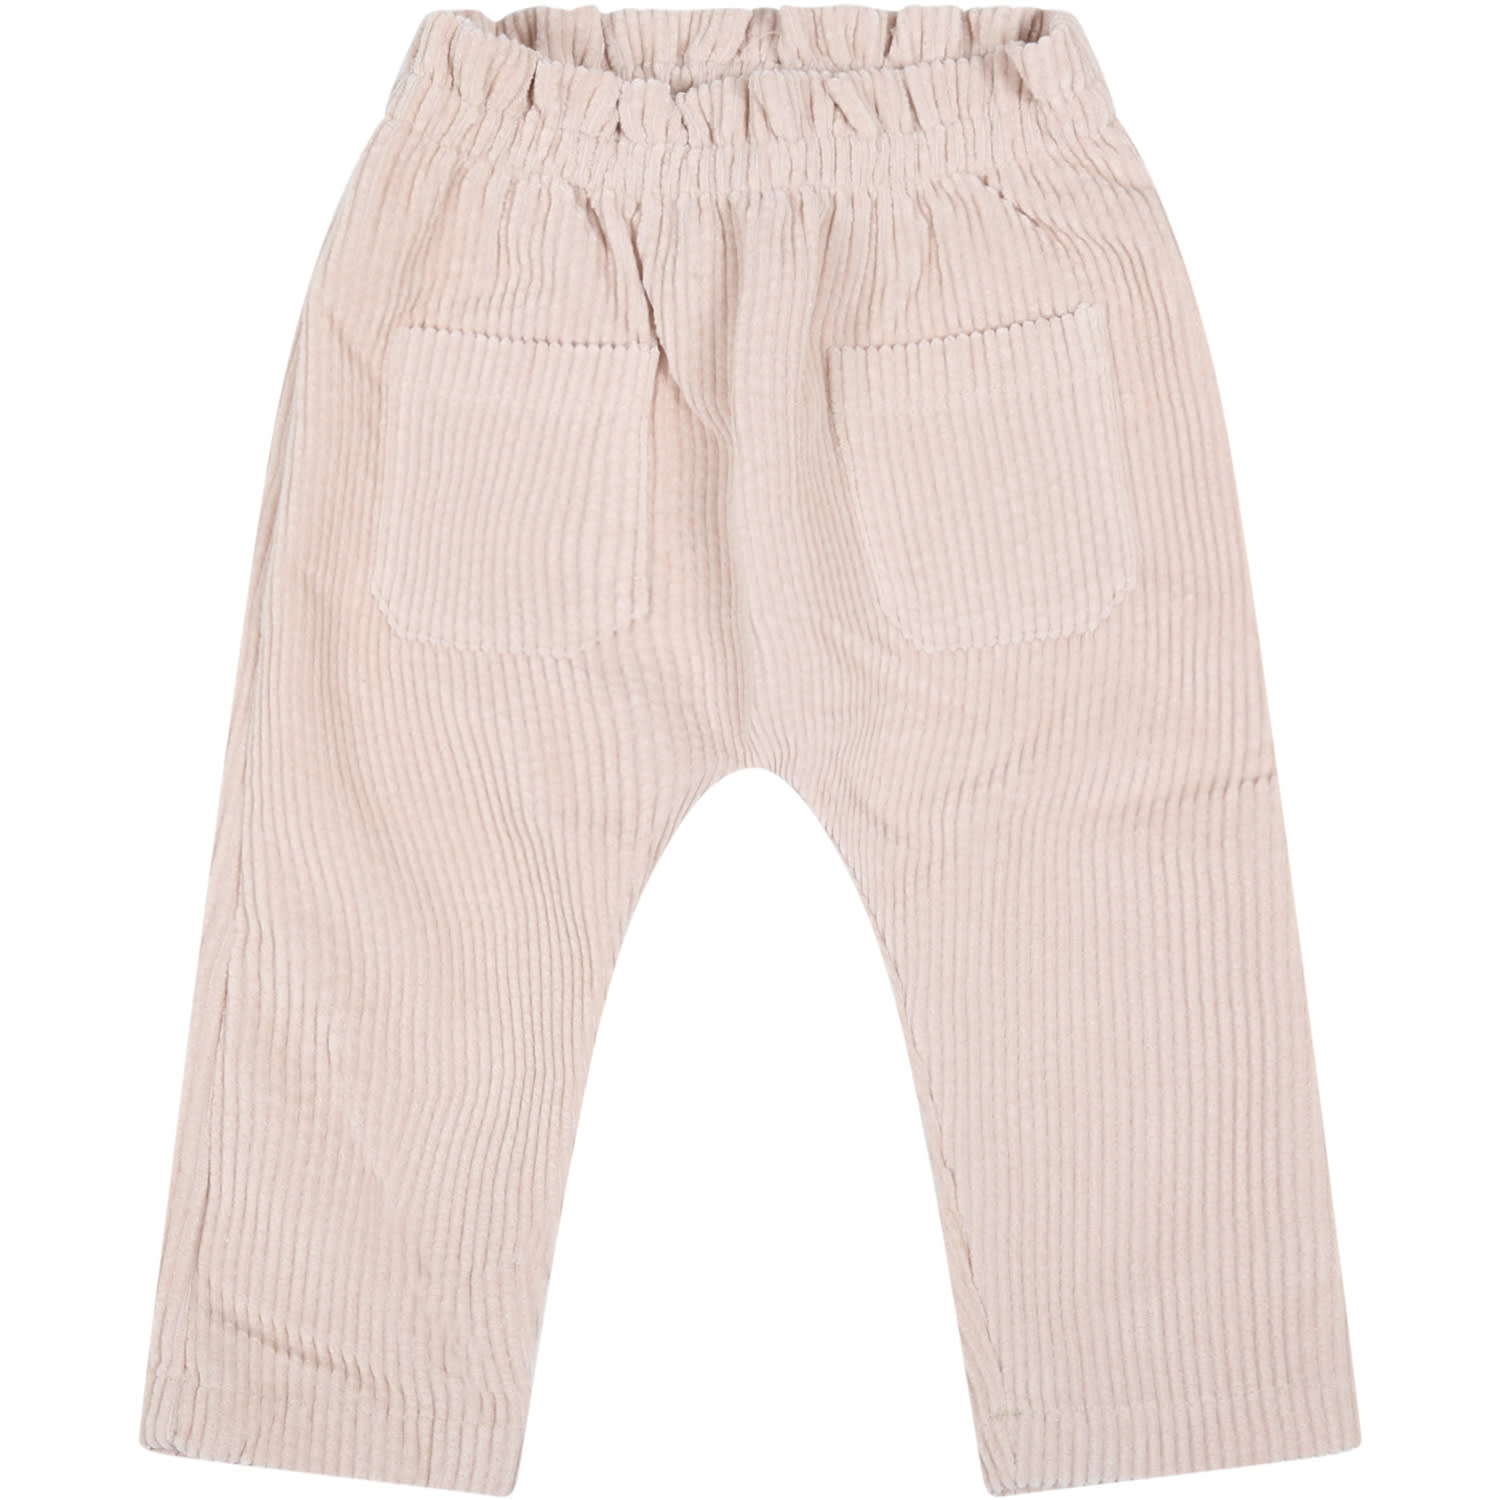 Caffe' d'Orzo Pink Trouser For Baby Girl